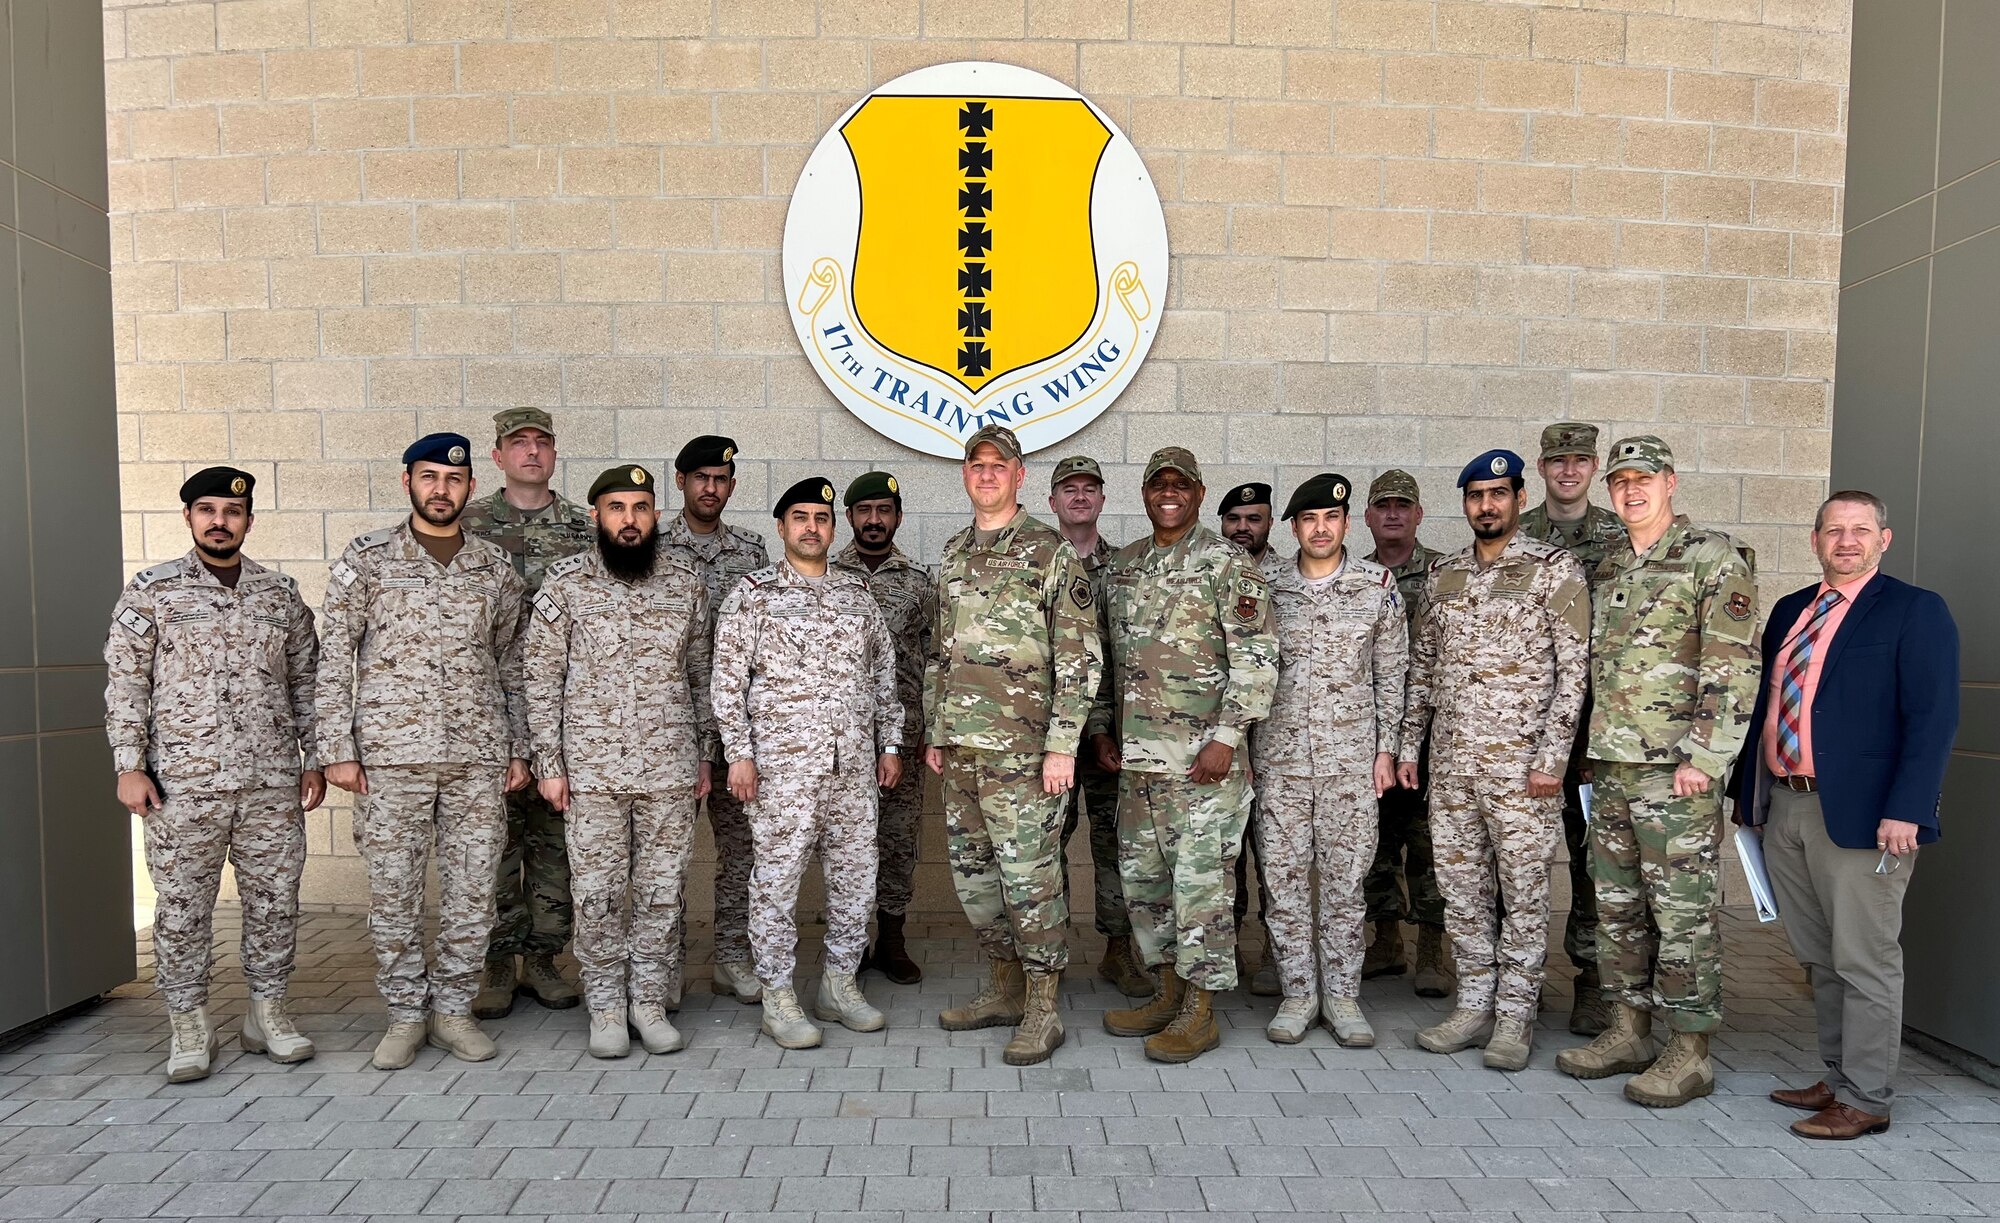 Members of the Royal Saudi Air Forces and members of the 17th Training Wing pose for a photo at Goodfellow Air Force Base, May 18, 2022. Members of the RSAF visited Goodfellow AFB to learn about the joint and coalition forces intelligence, surveillance, and reconnaissance training provided by the 17th TRW. (U.S. Air Force Photo by Senior Airman Michael Bowman